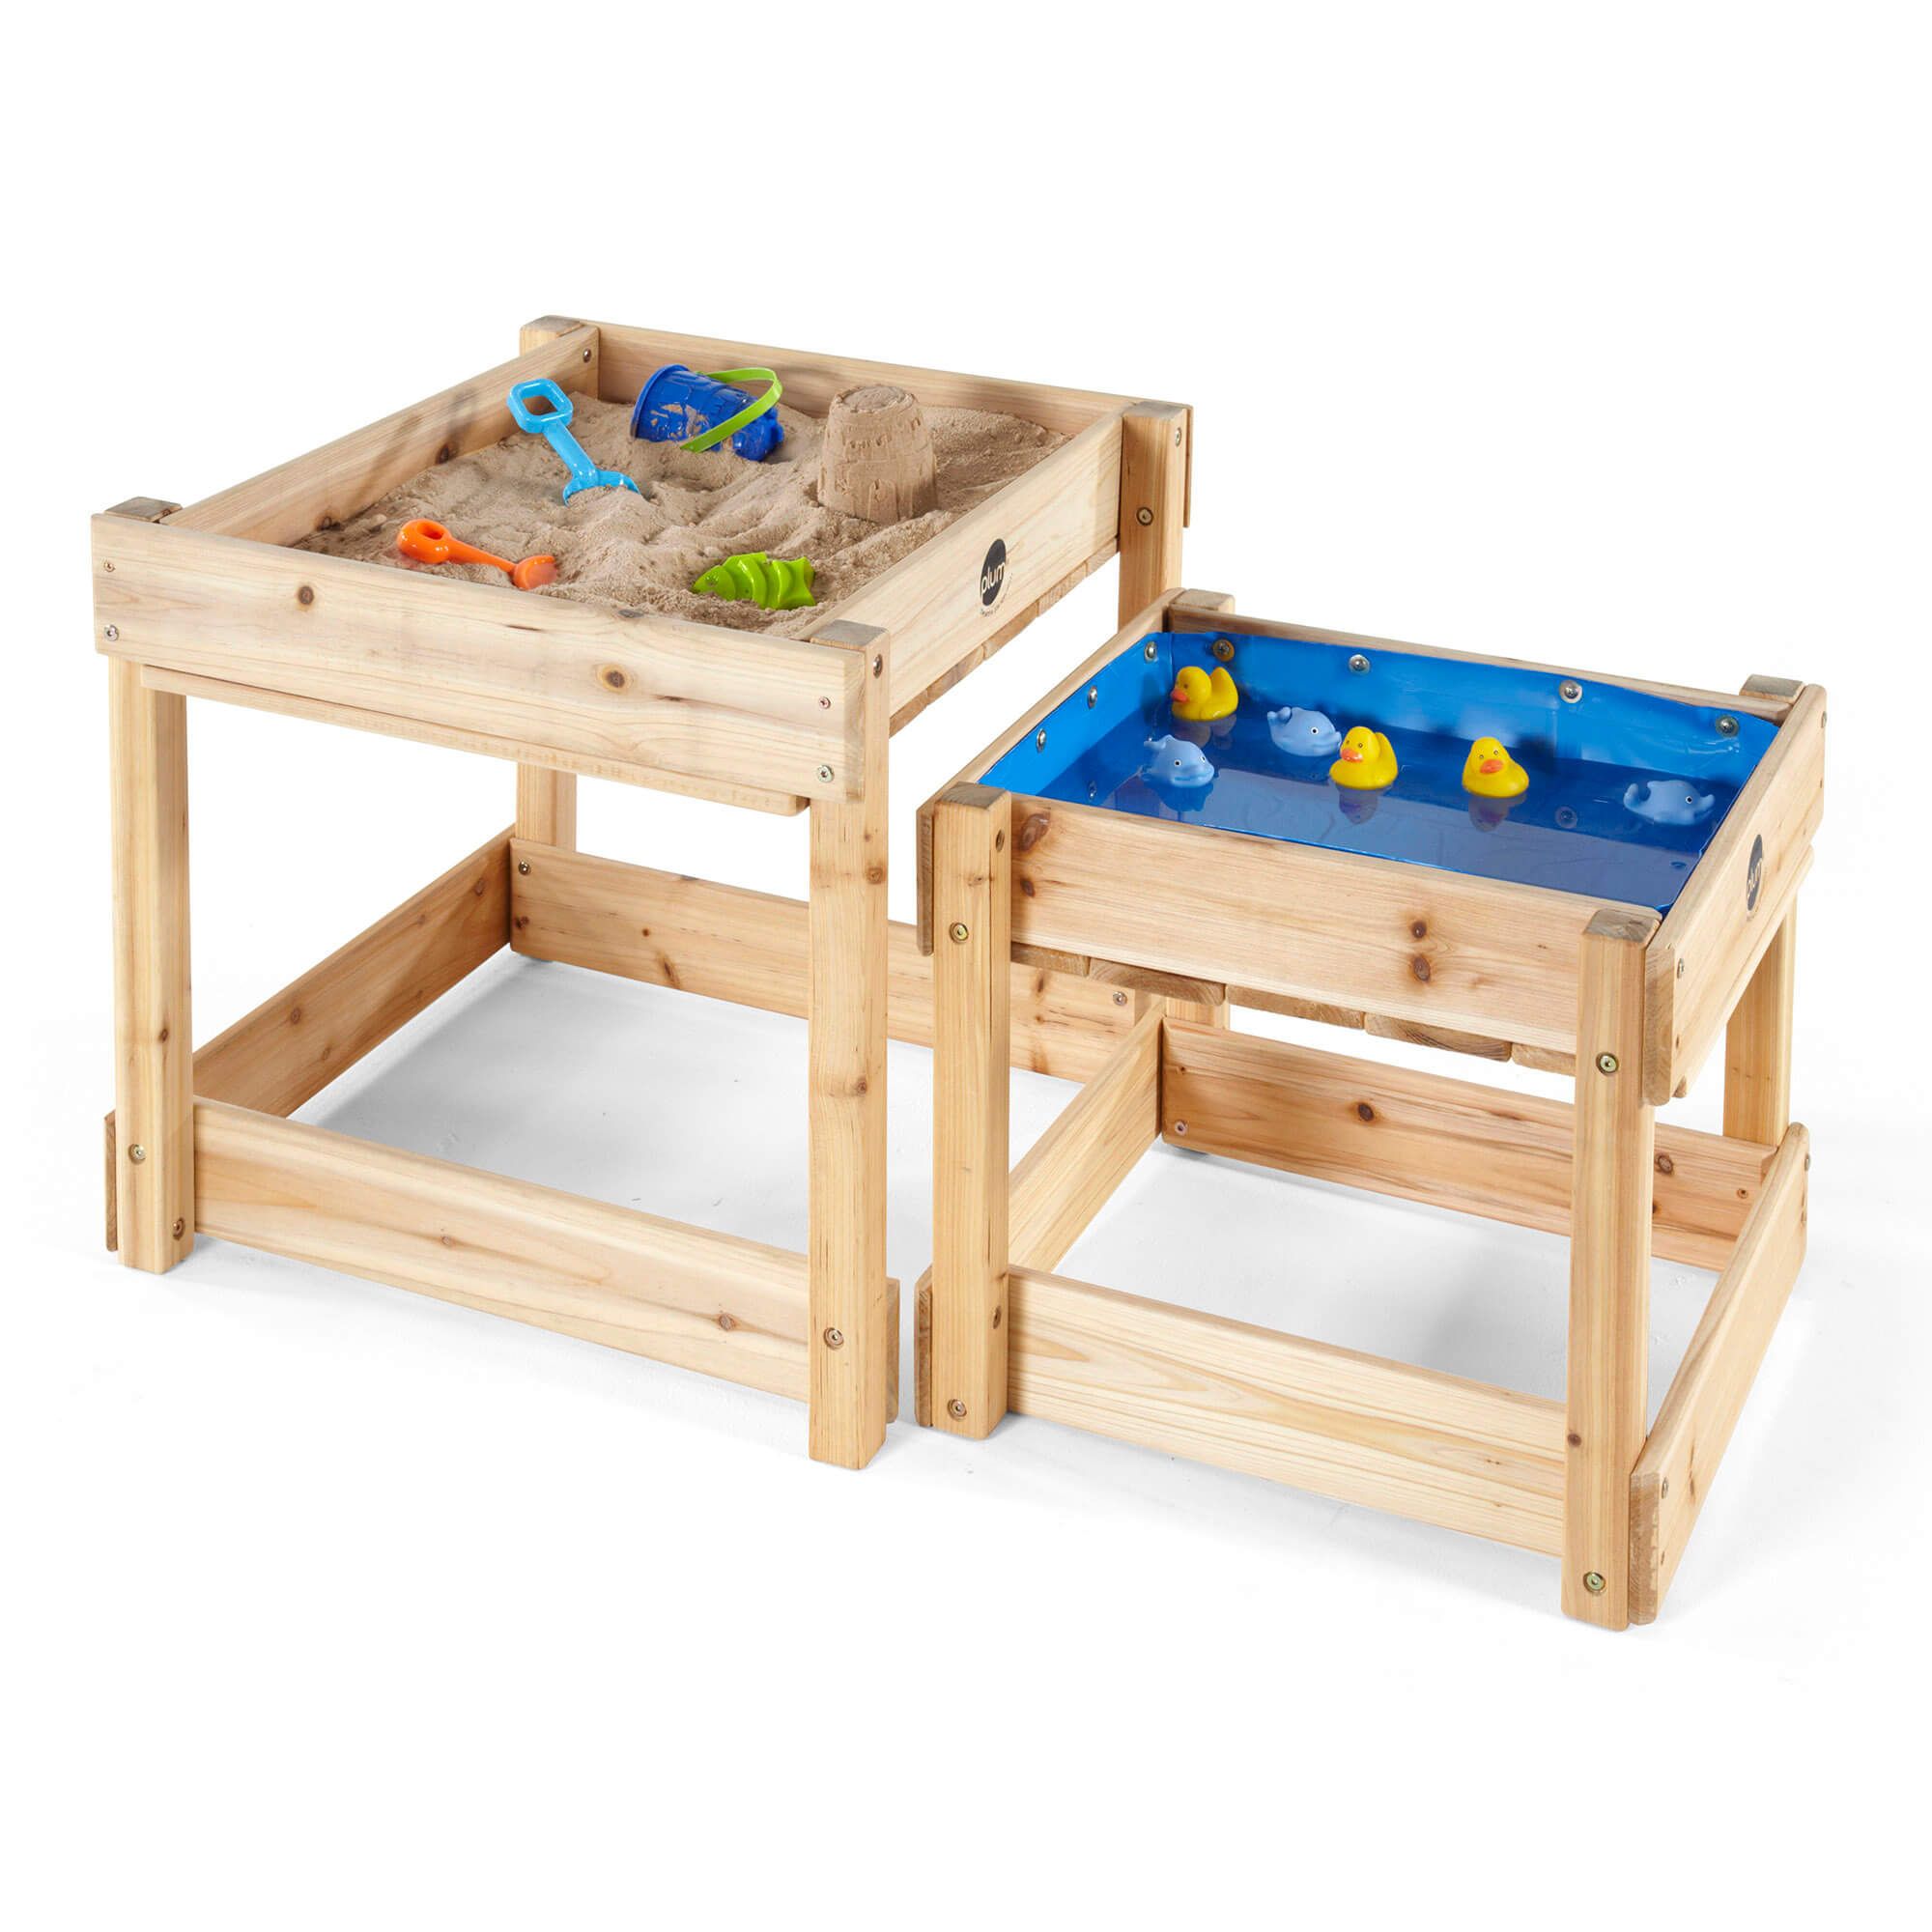 Plum Play Sandy Bay Wooden Sand & Water Tables with Cover